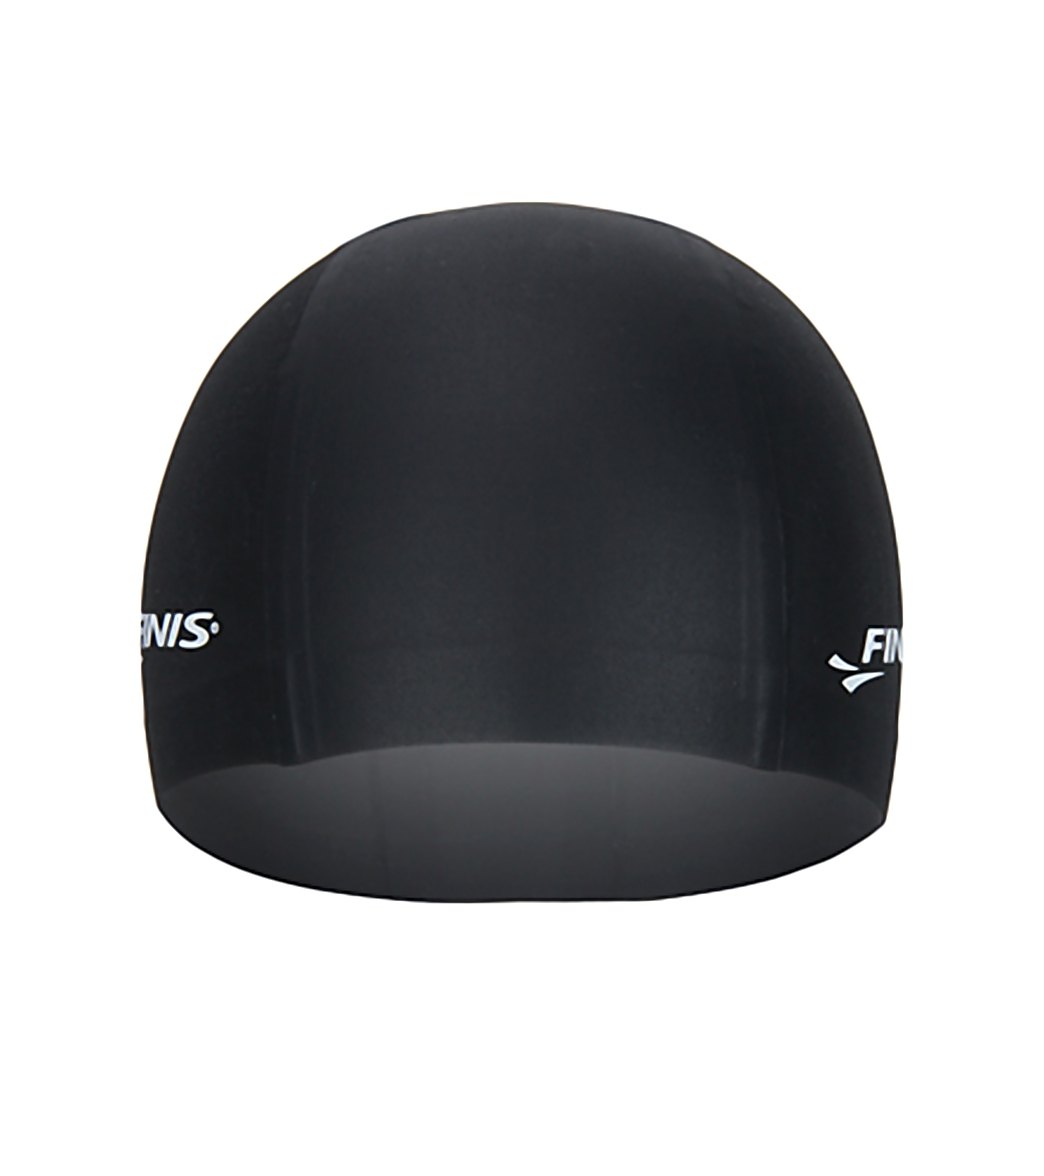 FINIS Hydrospeed Dome Swim Cap at SwimOutlet.com - Free Shipping